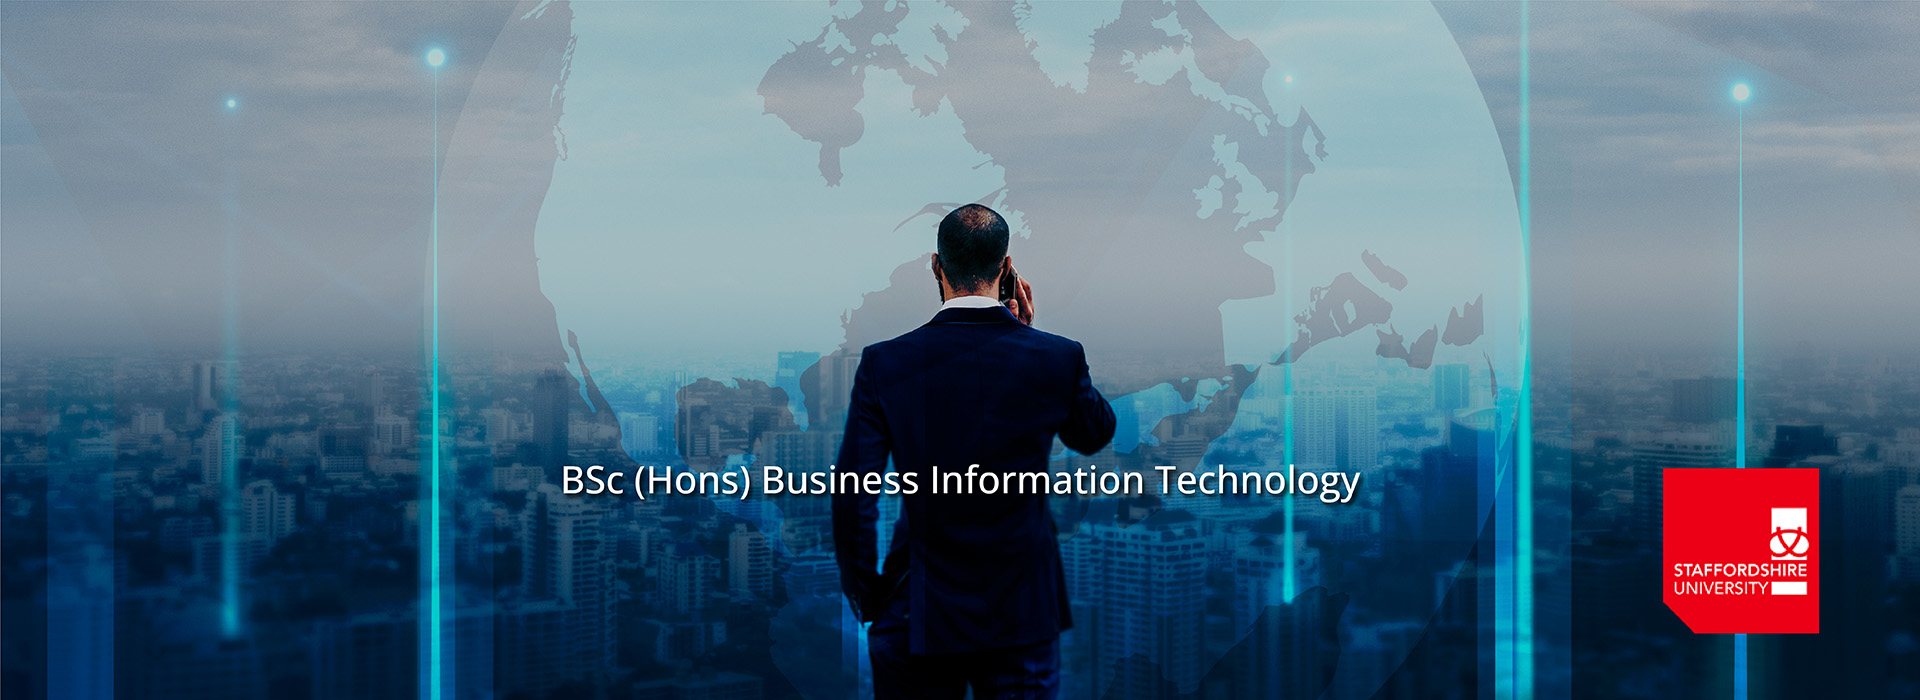 BSc (Hons) Business Information Technology